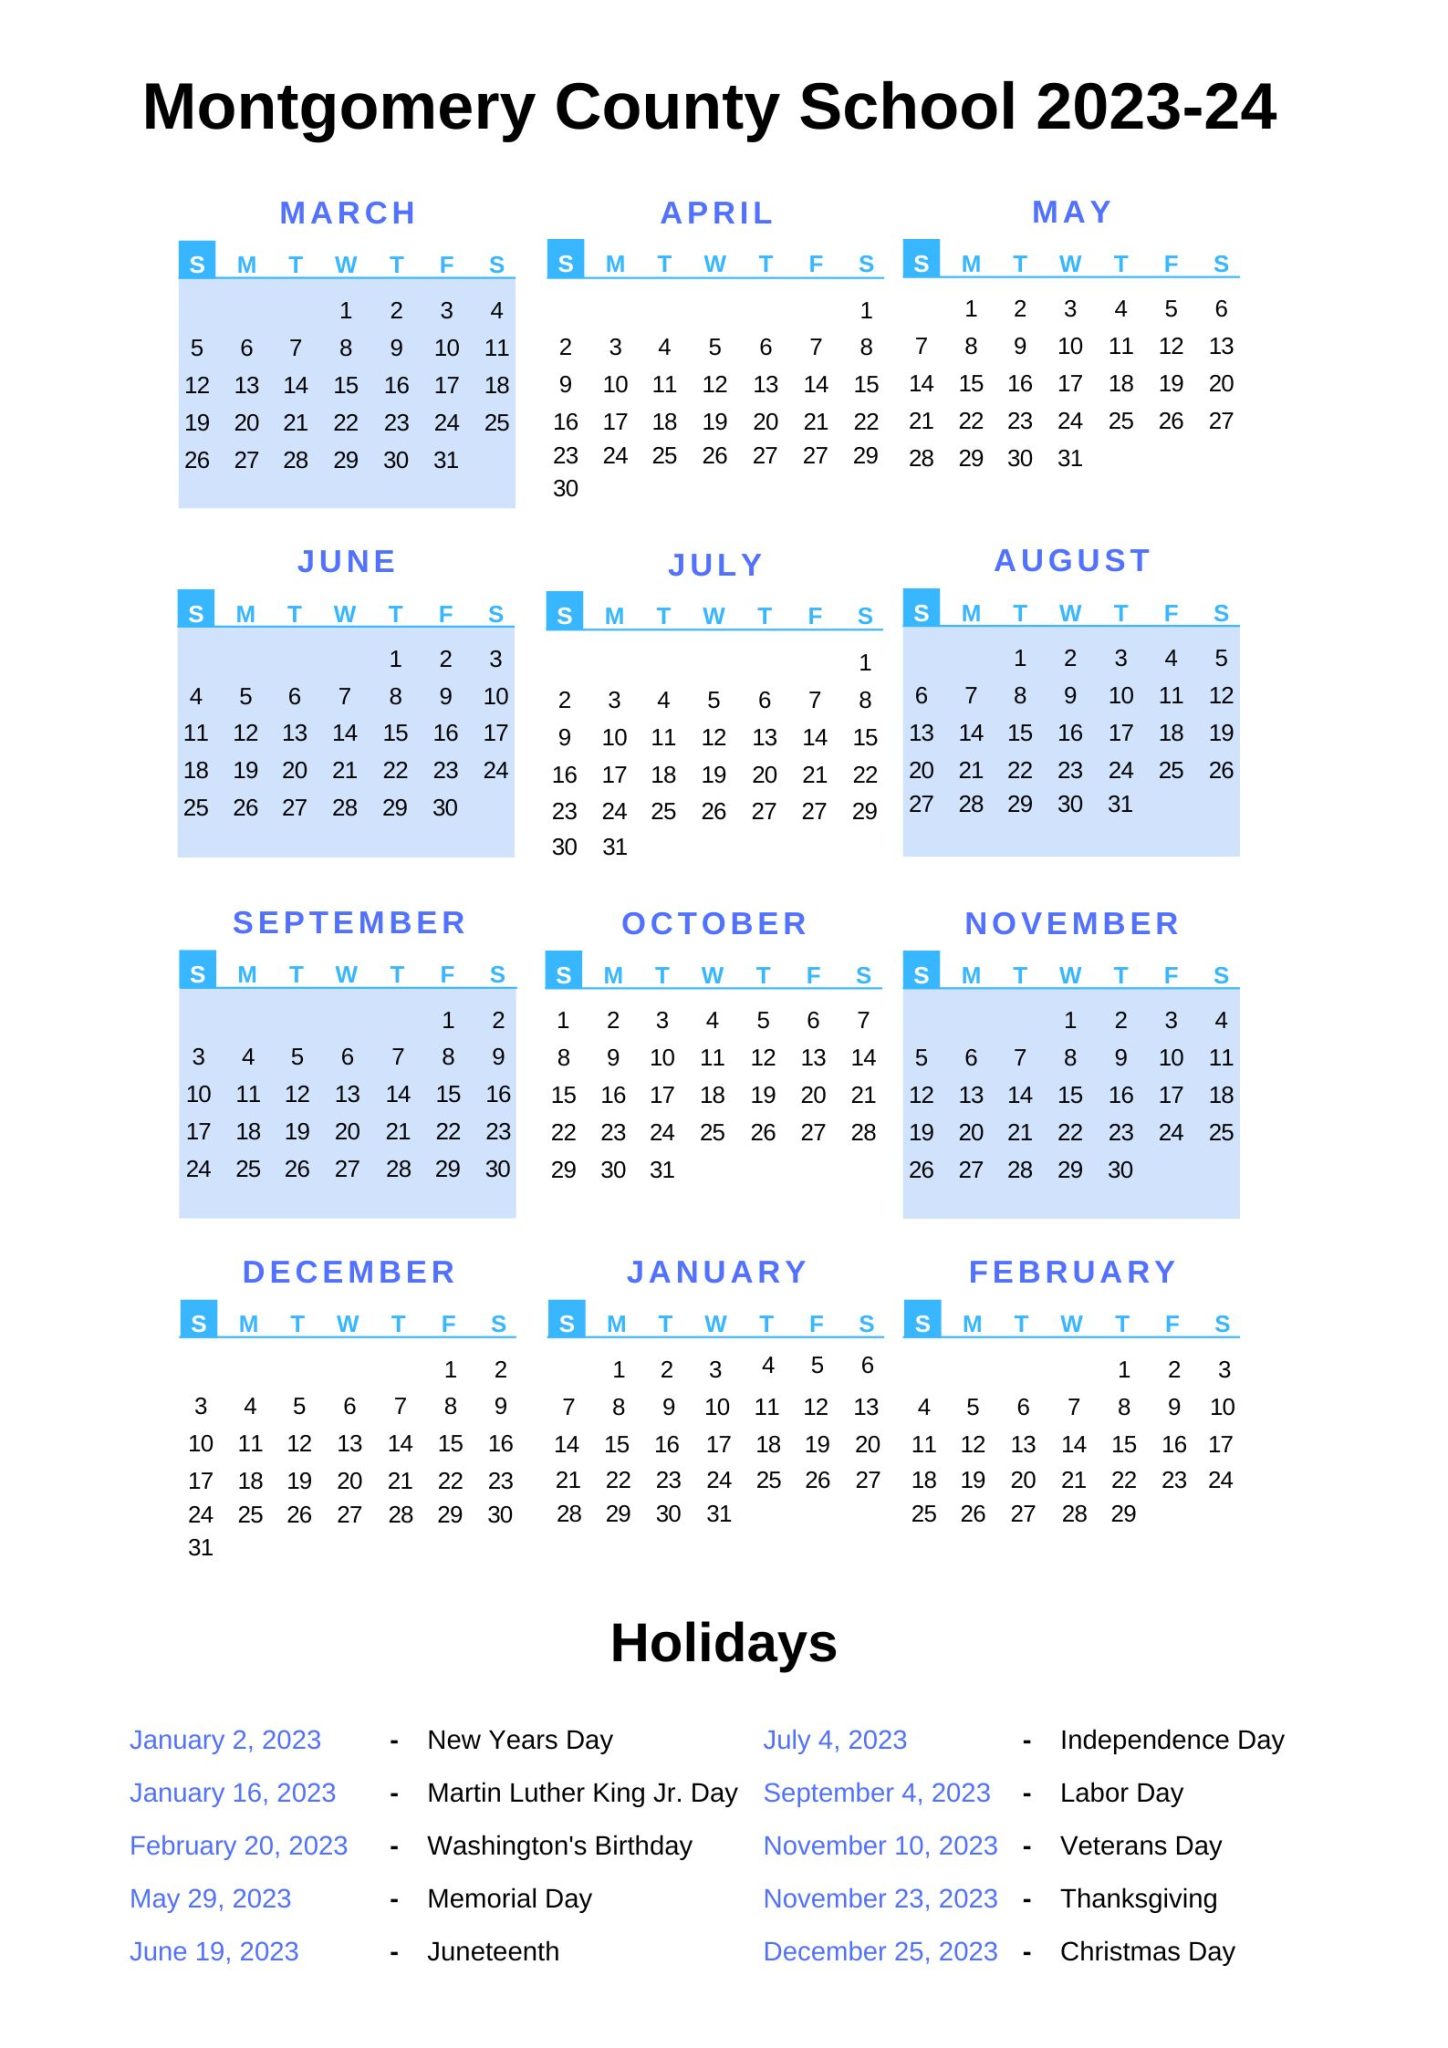 montgomery-county-schools-calendar-2023-24-with-holidays